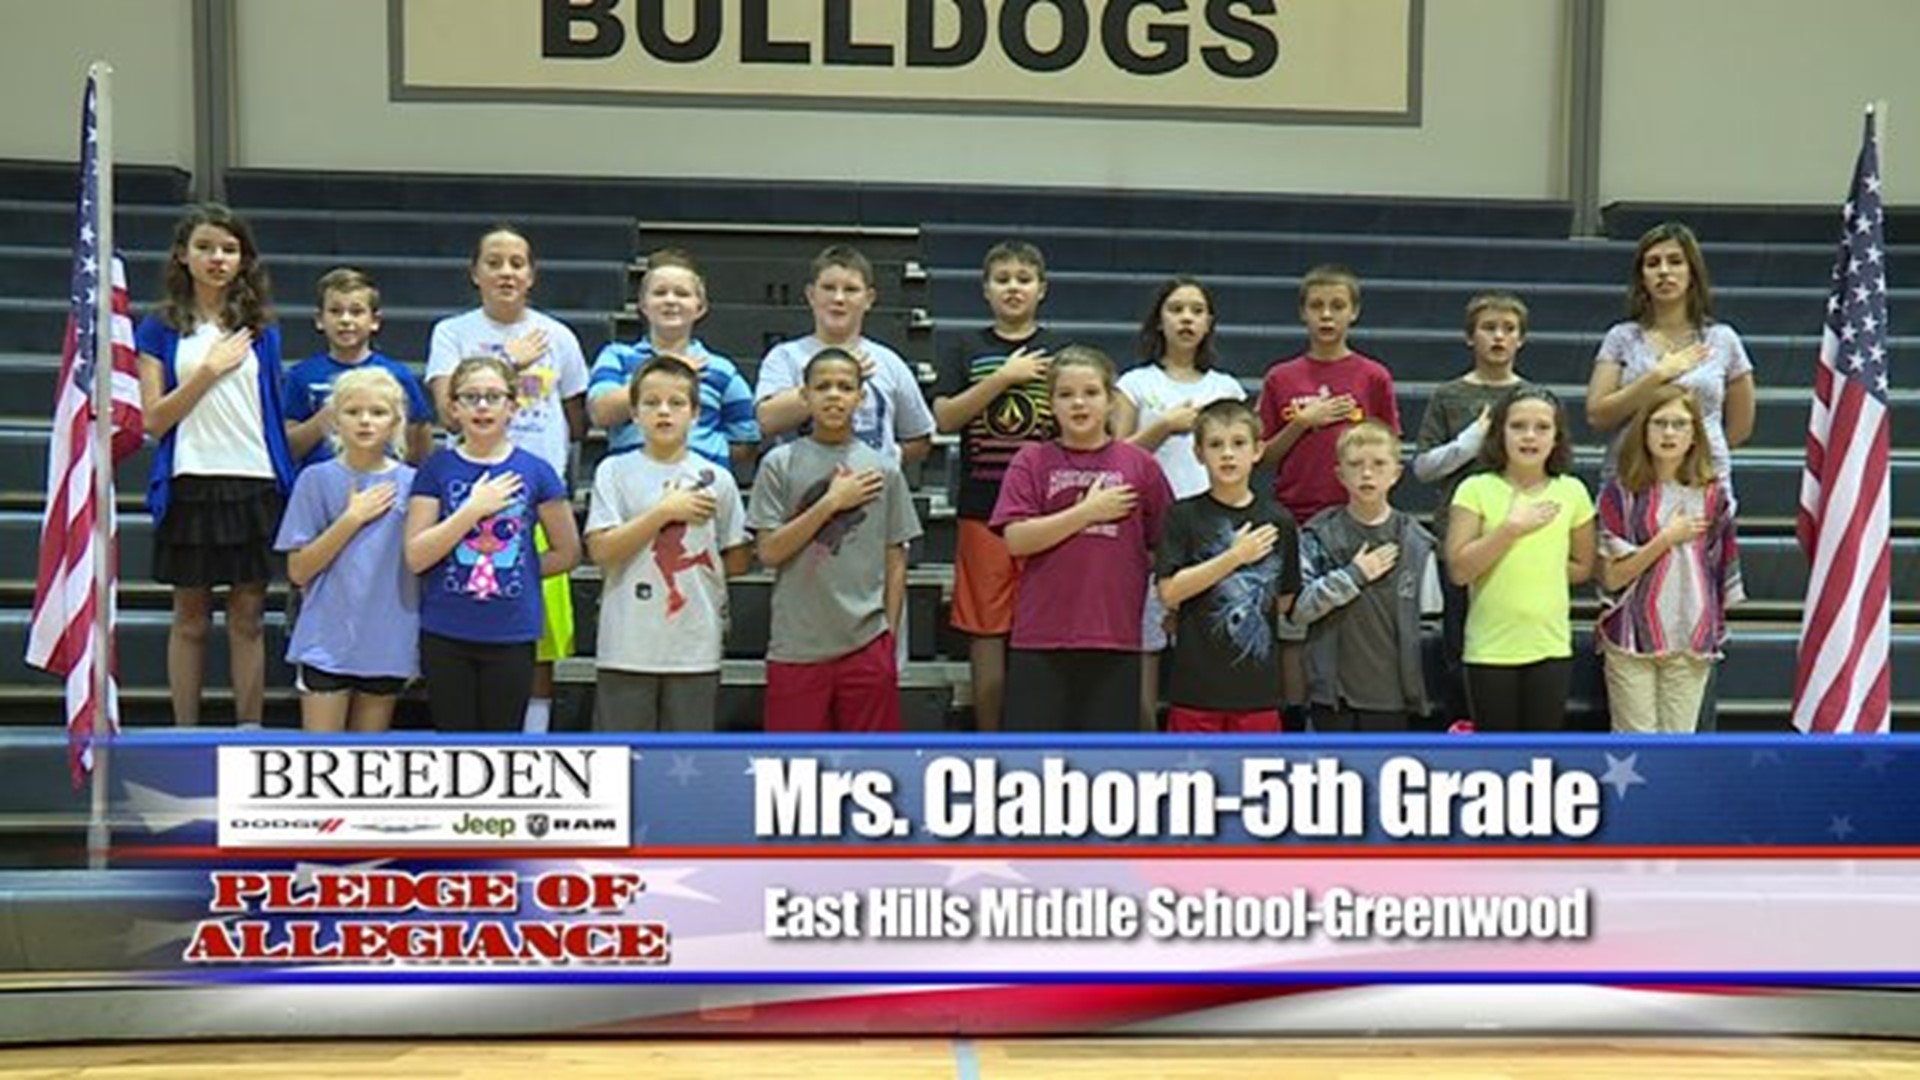 East Hills Middle School, Greenwood - Mrs. Claborn, 5th Grade